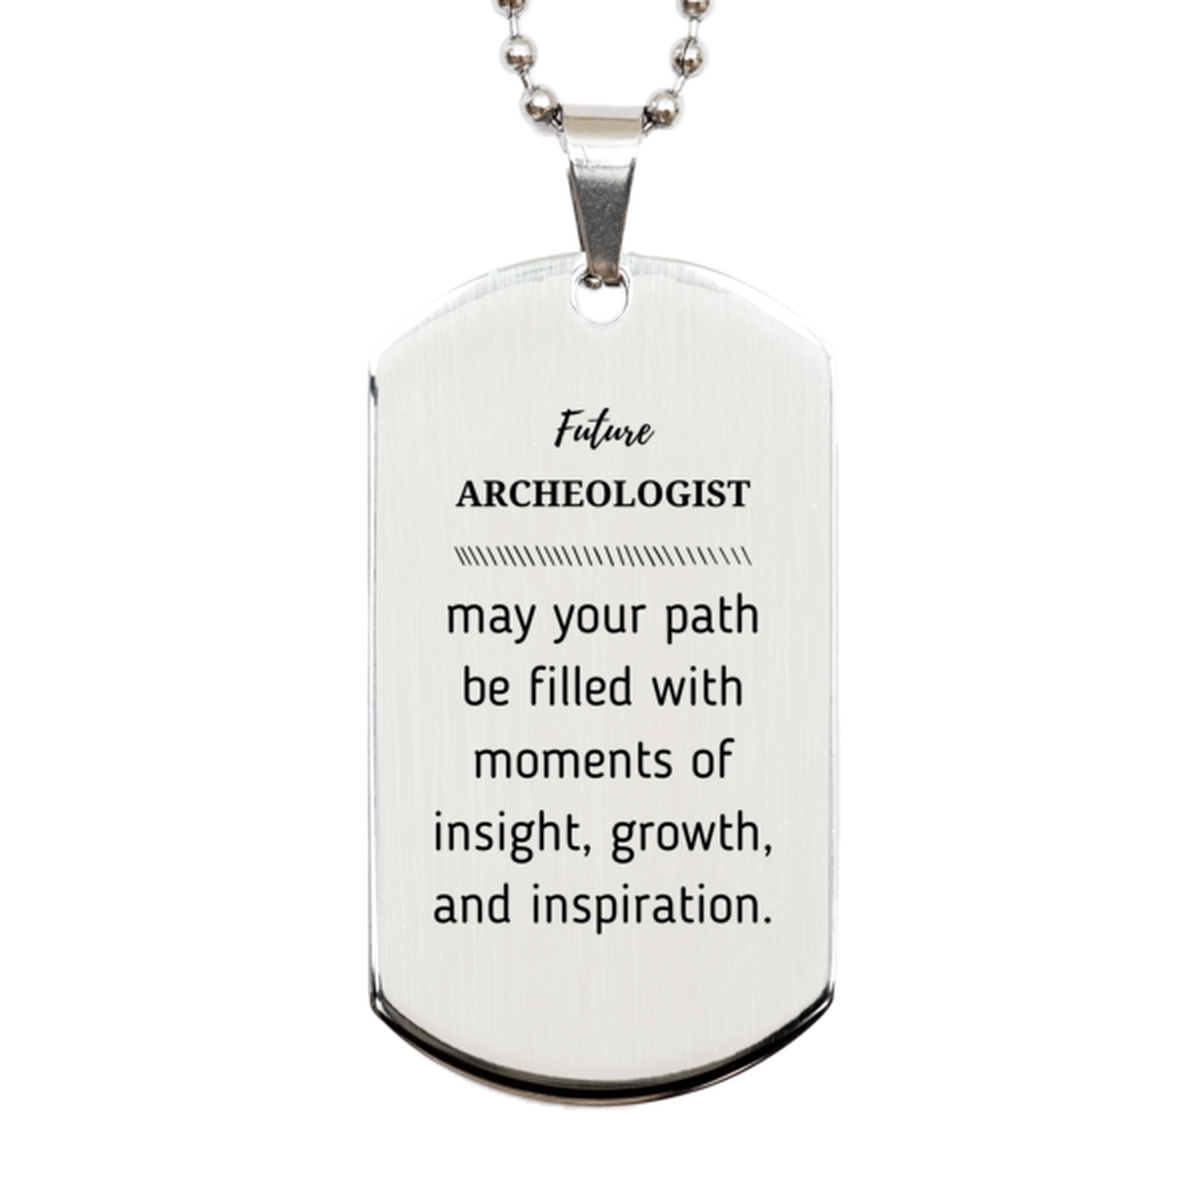 Future Archeologist Gifts, May your path be filled with moments of insight, Graduation Gifts for New Archeologist, Christmas Unique Silver Dog Tag For Men, Women, Friends